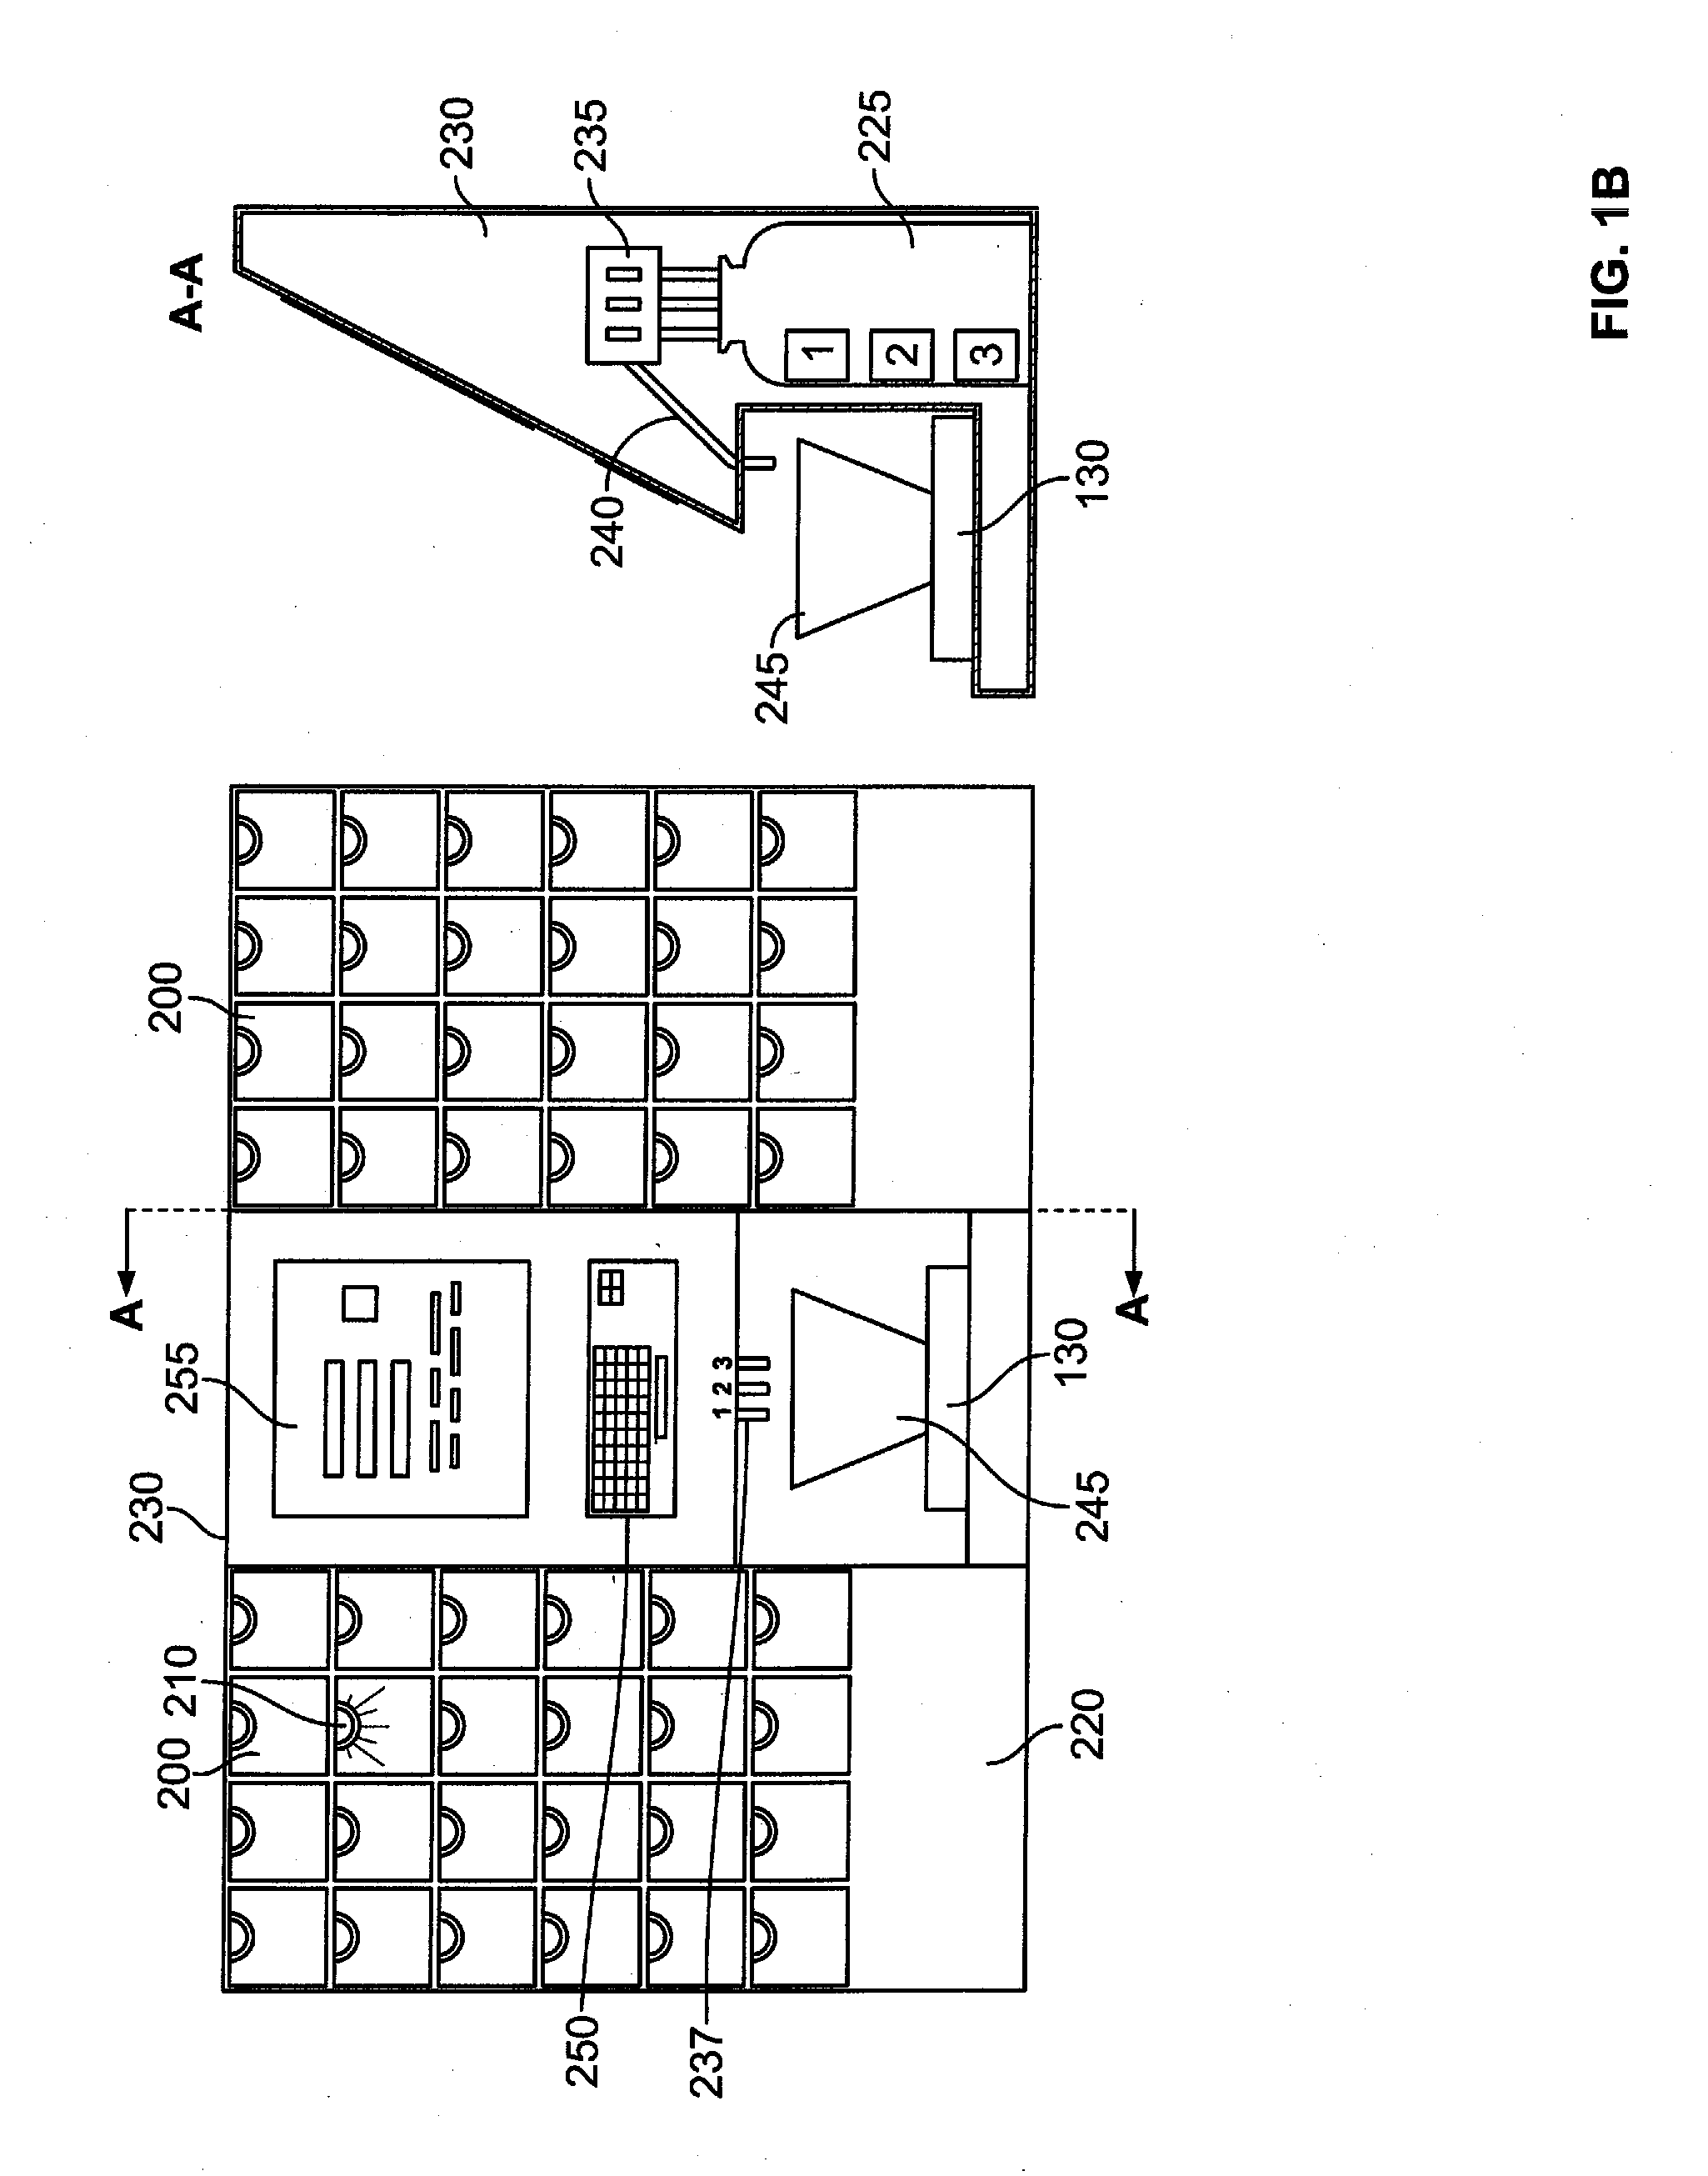 Manual Hair Dye Apparatus and Method for Using the Same